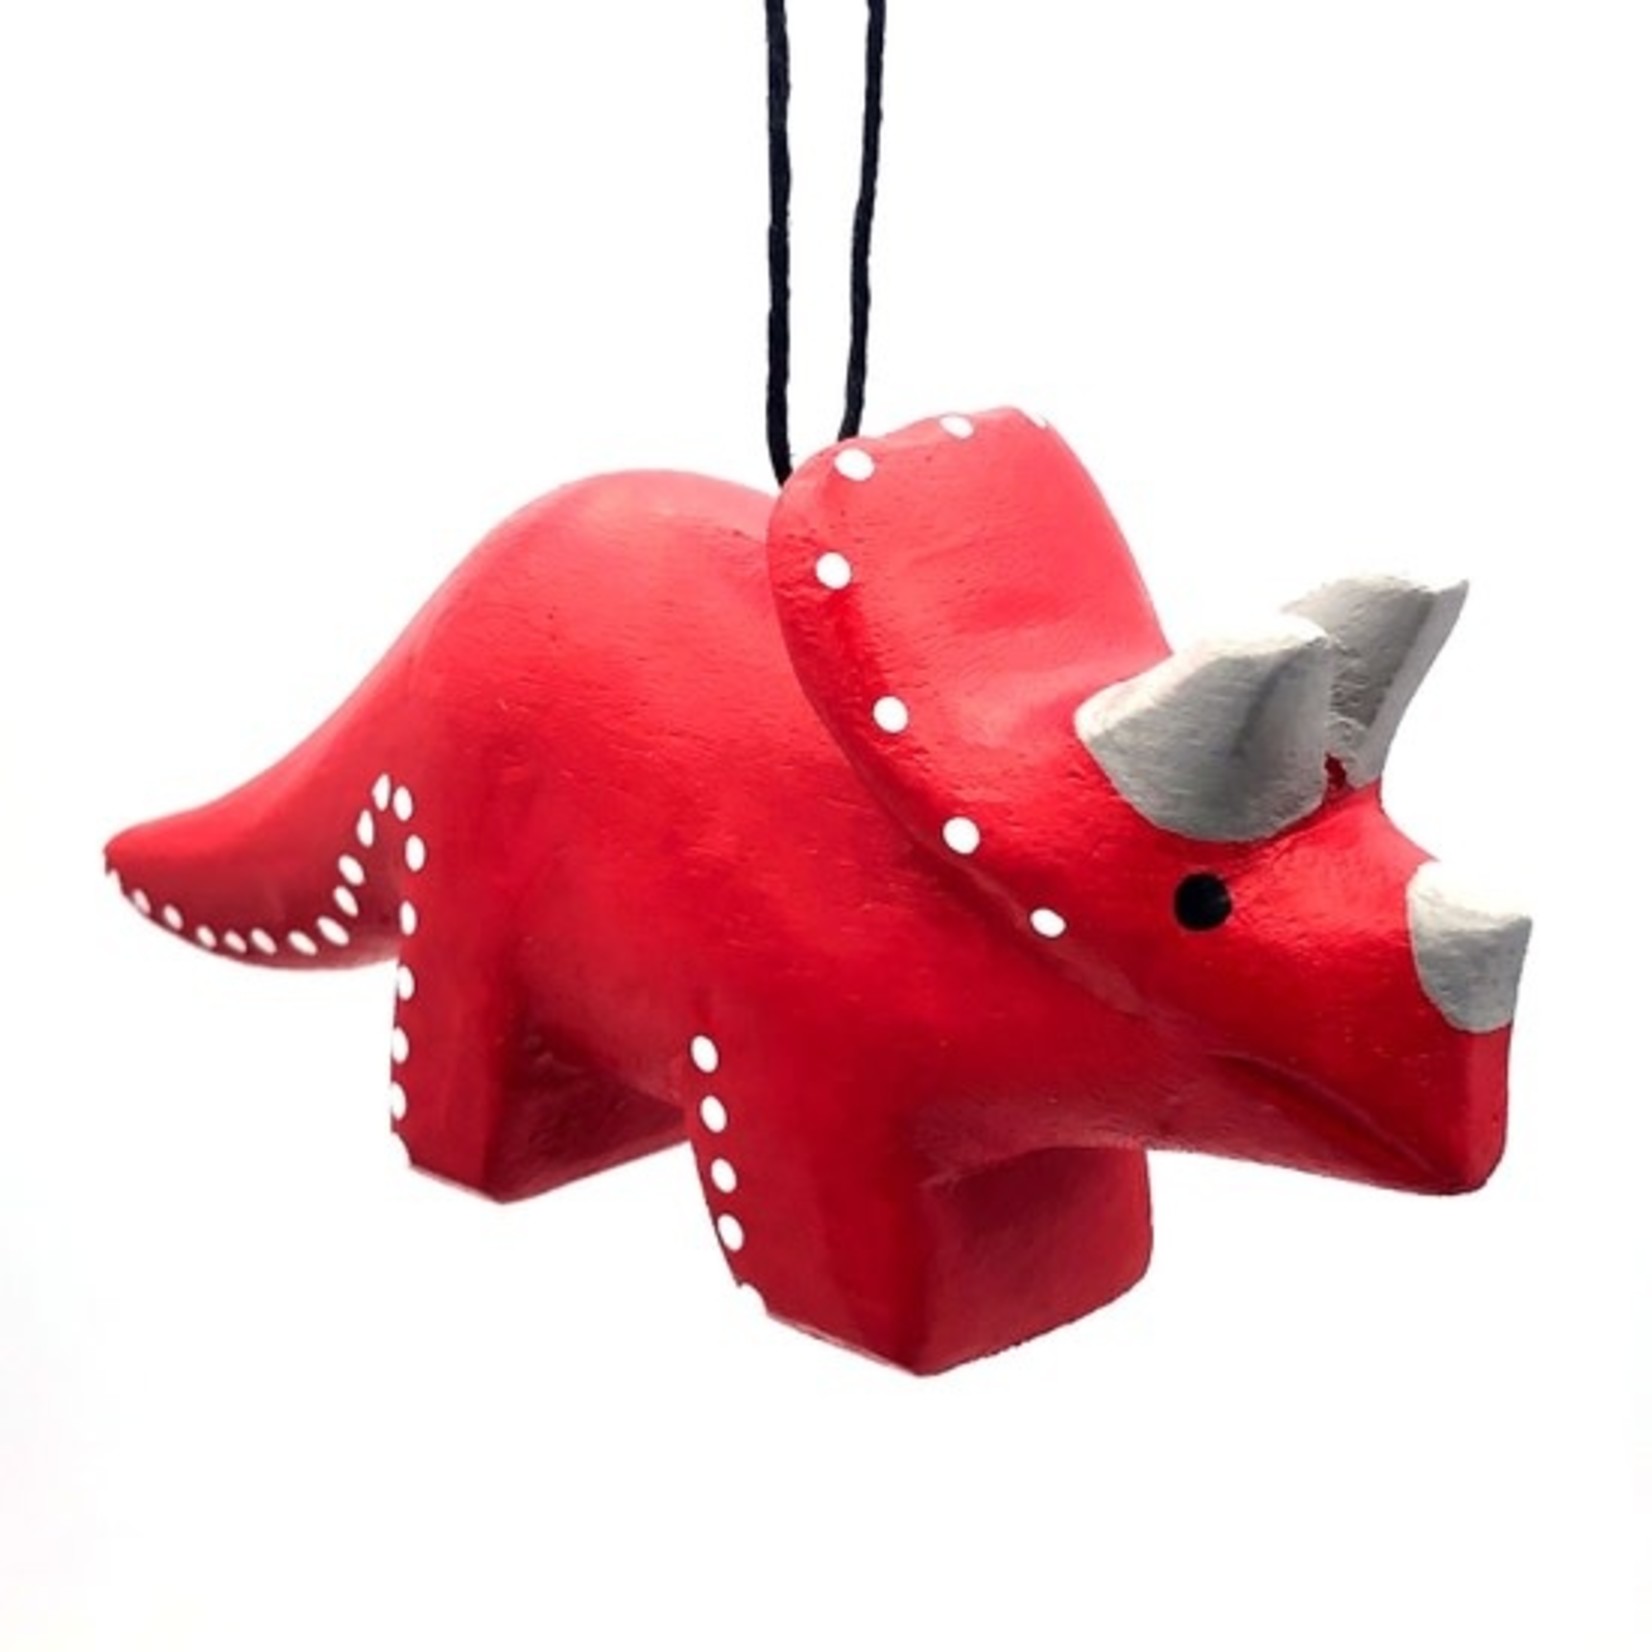 Women of the Cloud Forrest Whimsical Triceratops Balsa Ornament, Nicaragua